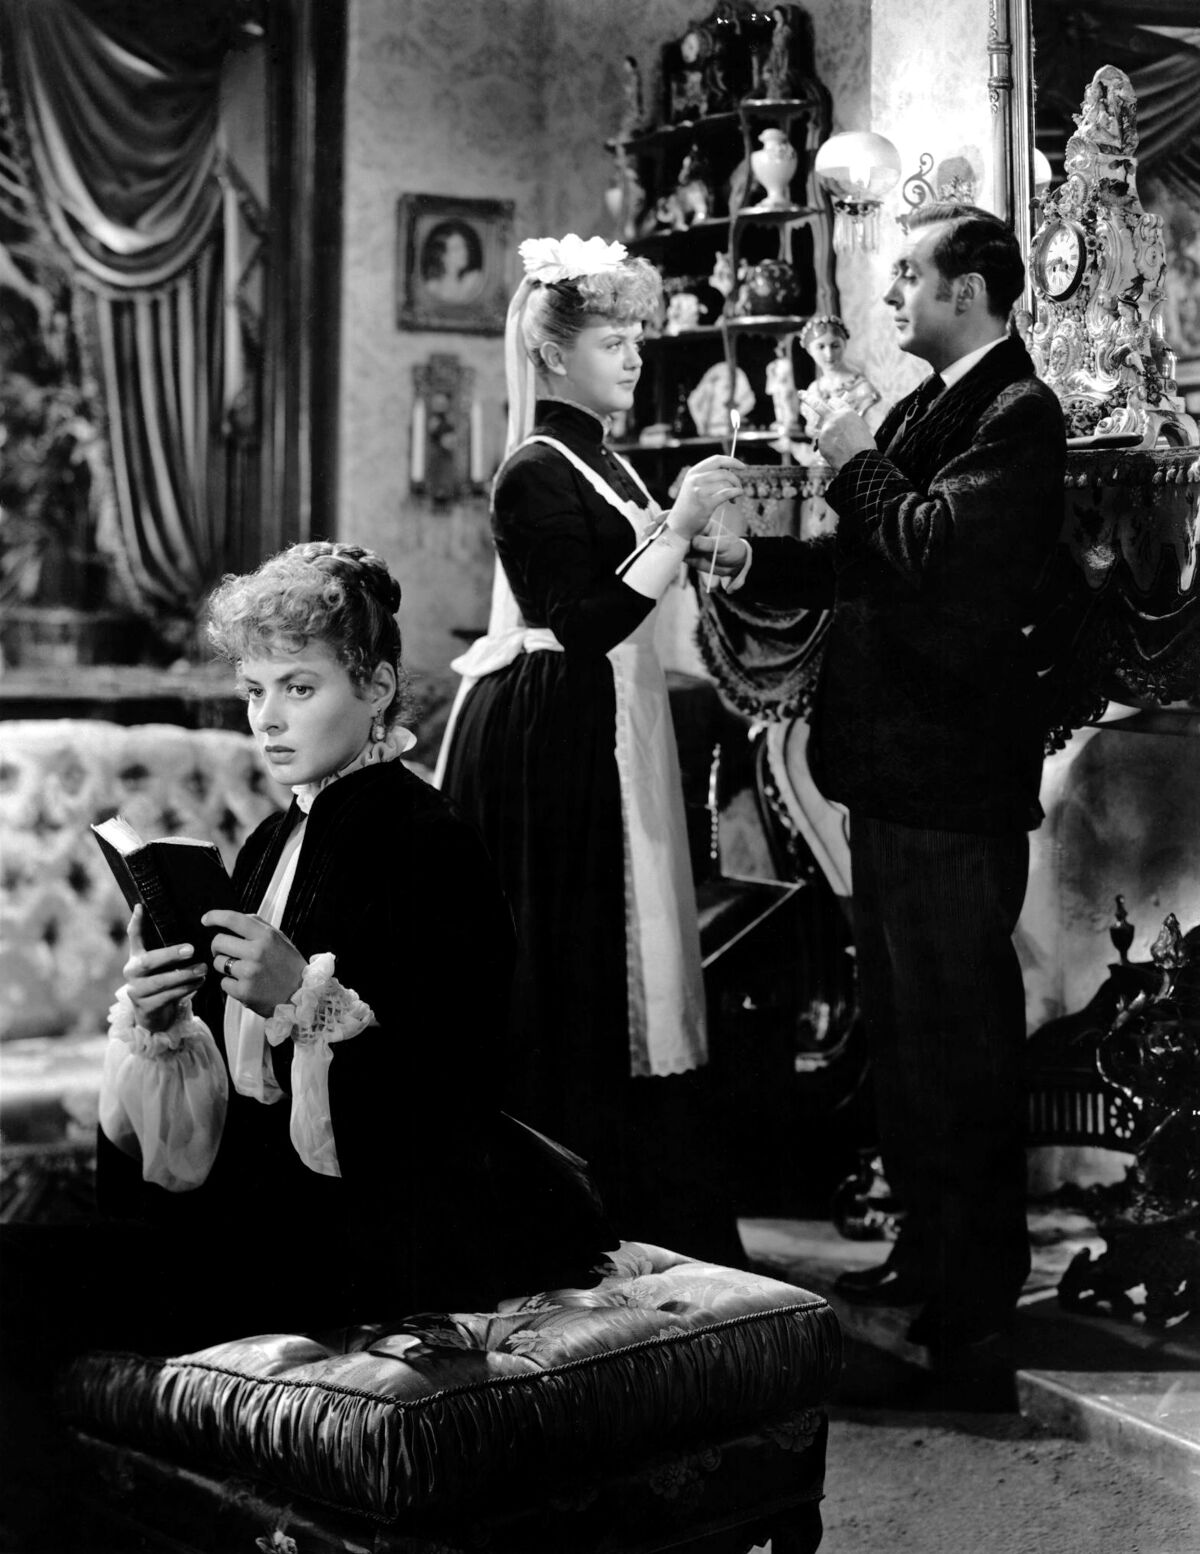 Ingrid Bergman, left, reads a book while Angela Lansbury and Charles Boyer are standing behind in "Gaslight" (1944)